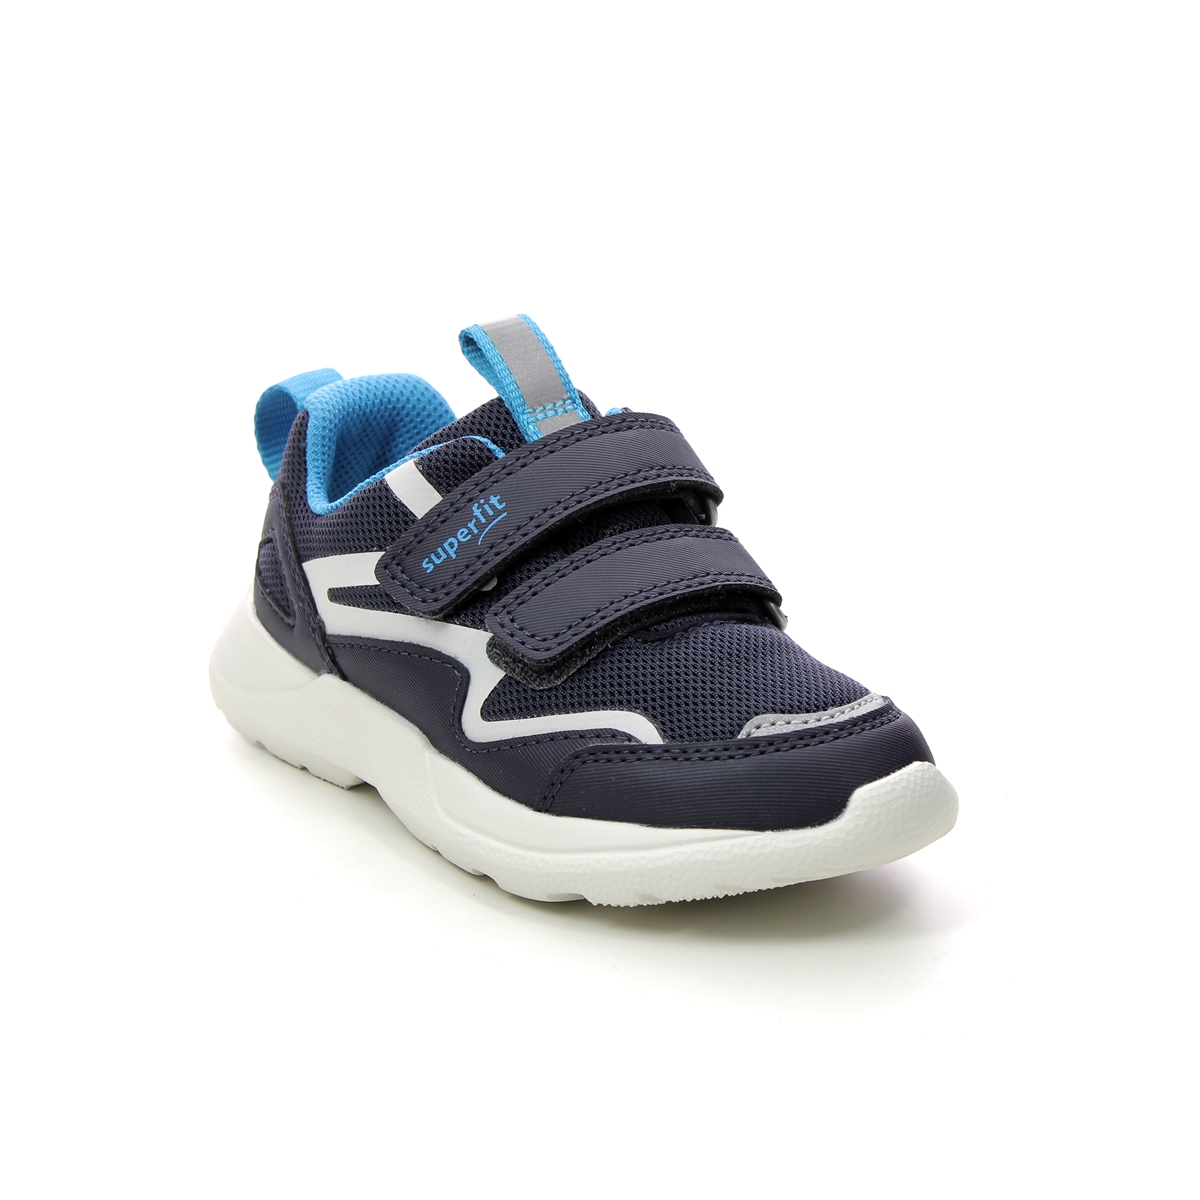 Superfit Rush Mini Navy Kids Trainers 1006206-8000 In Size 27 In Plain Navy For kids